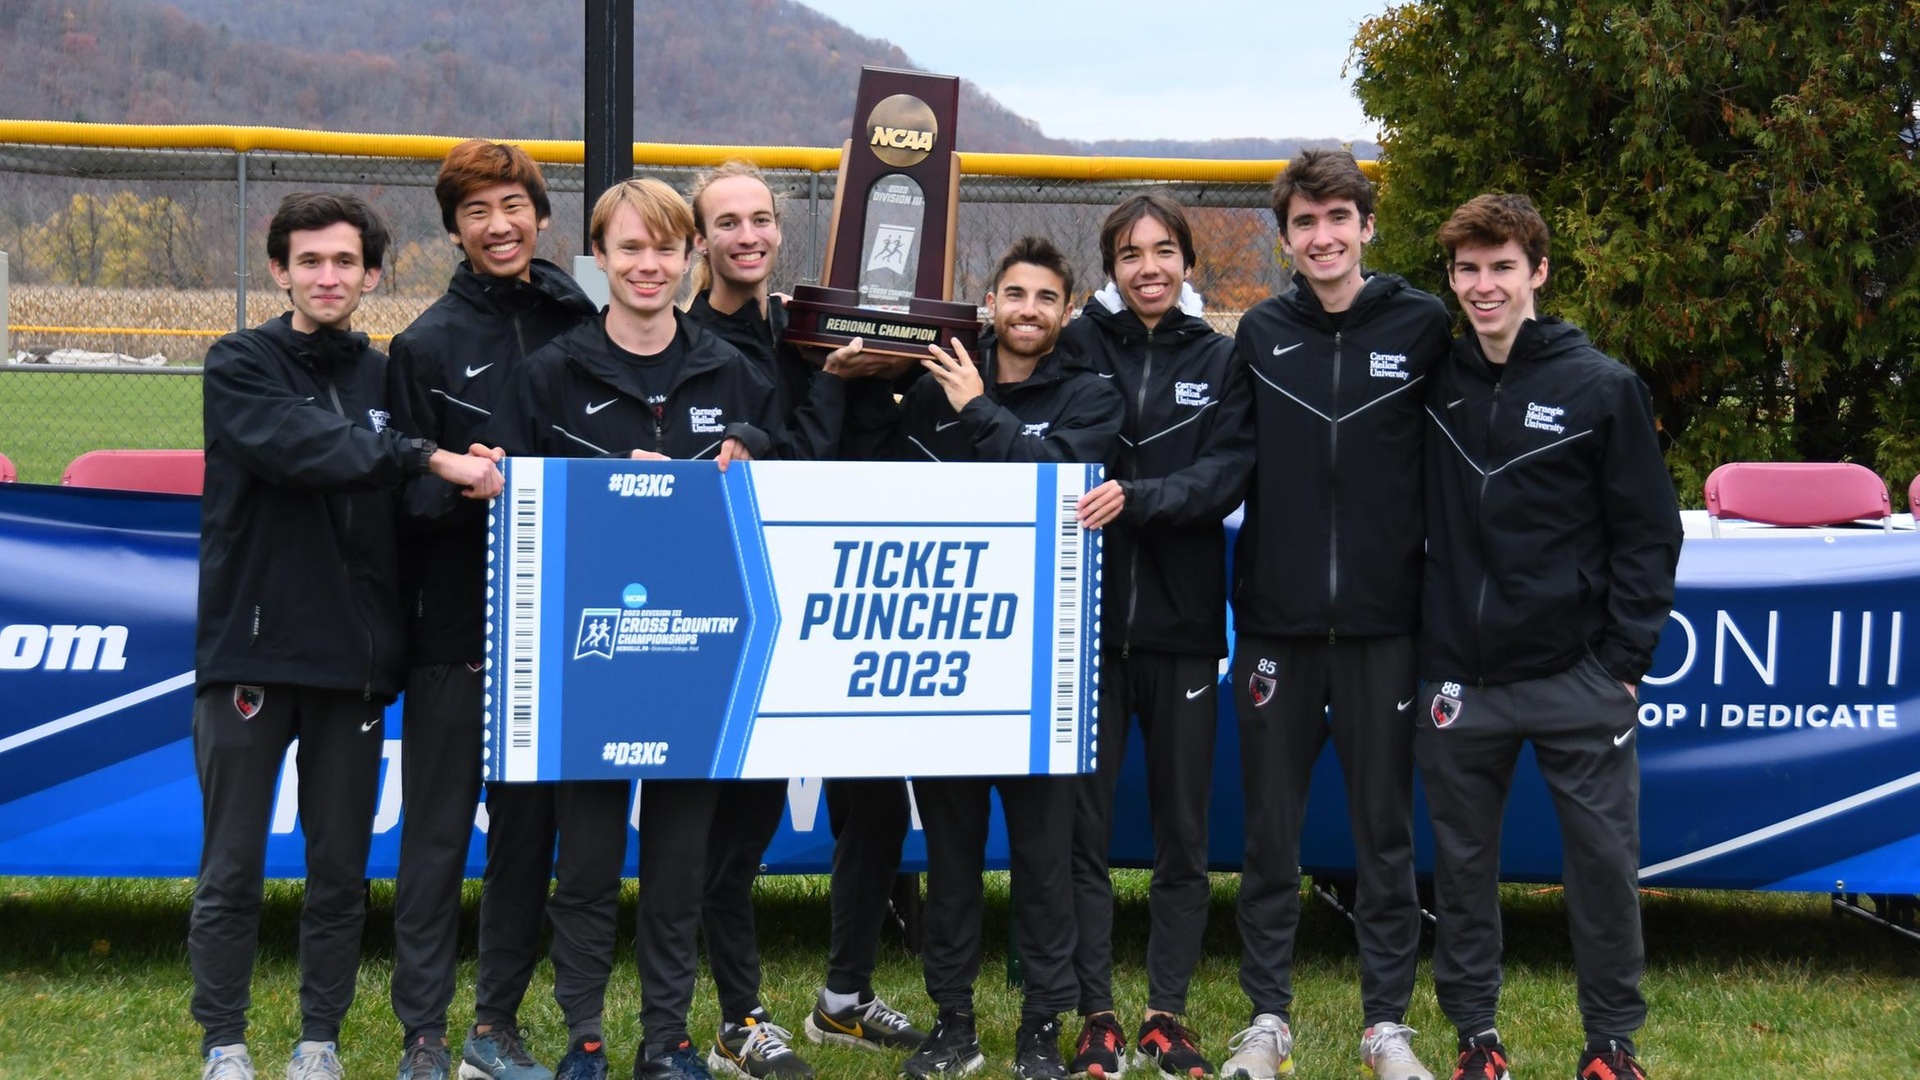 group of men wearing black training suits holding a trophy and sign reading Ticket Punched 2023